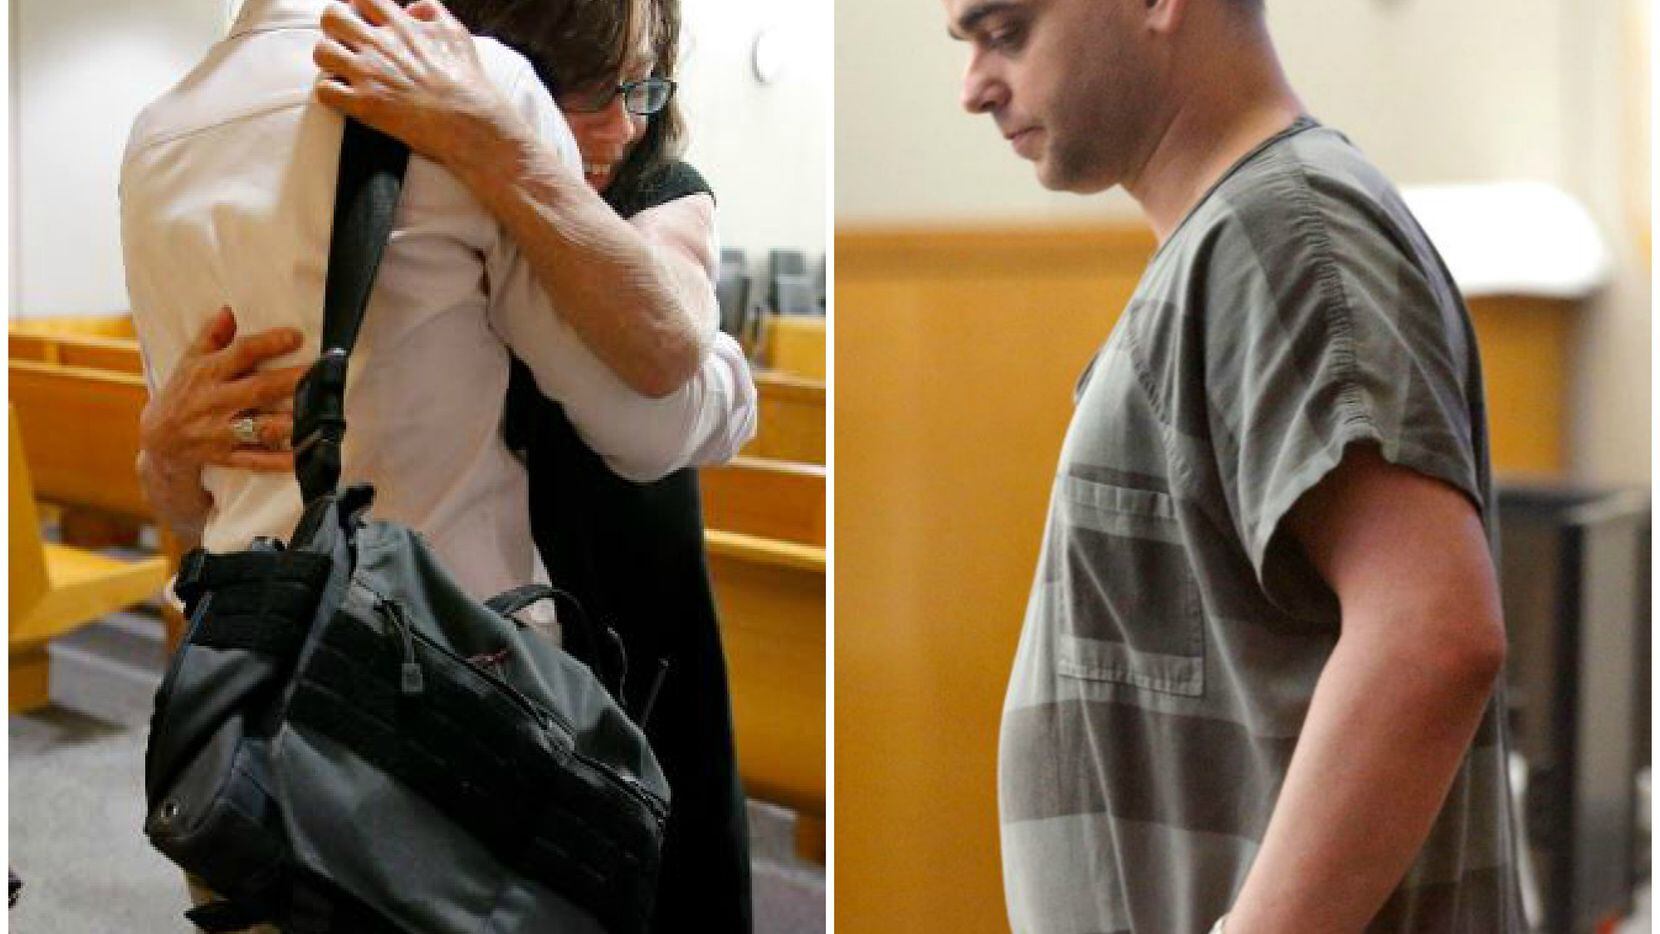 Danyeil Townzen (left), at the sentencing hearing for her ex-boyfriend, Matthew Gerth (right). Gerth was sentenced to life in prison Sept. 13 for setting Townzen on fire outside a Dallas apartment in 2018.